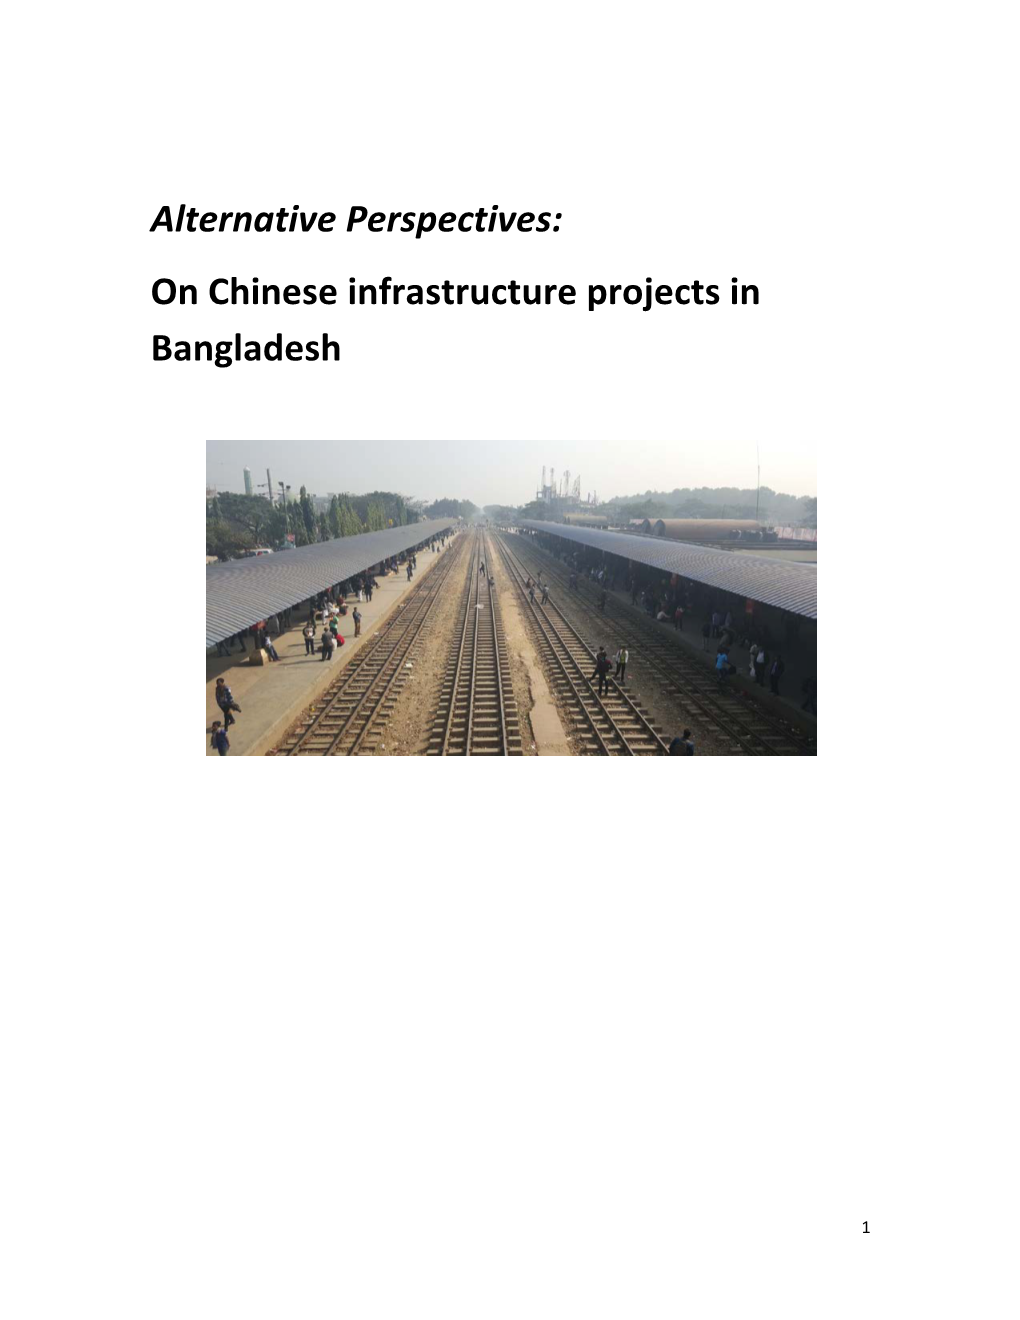 On Chinese Infrastructure Projects in Bangladesh